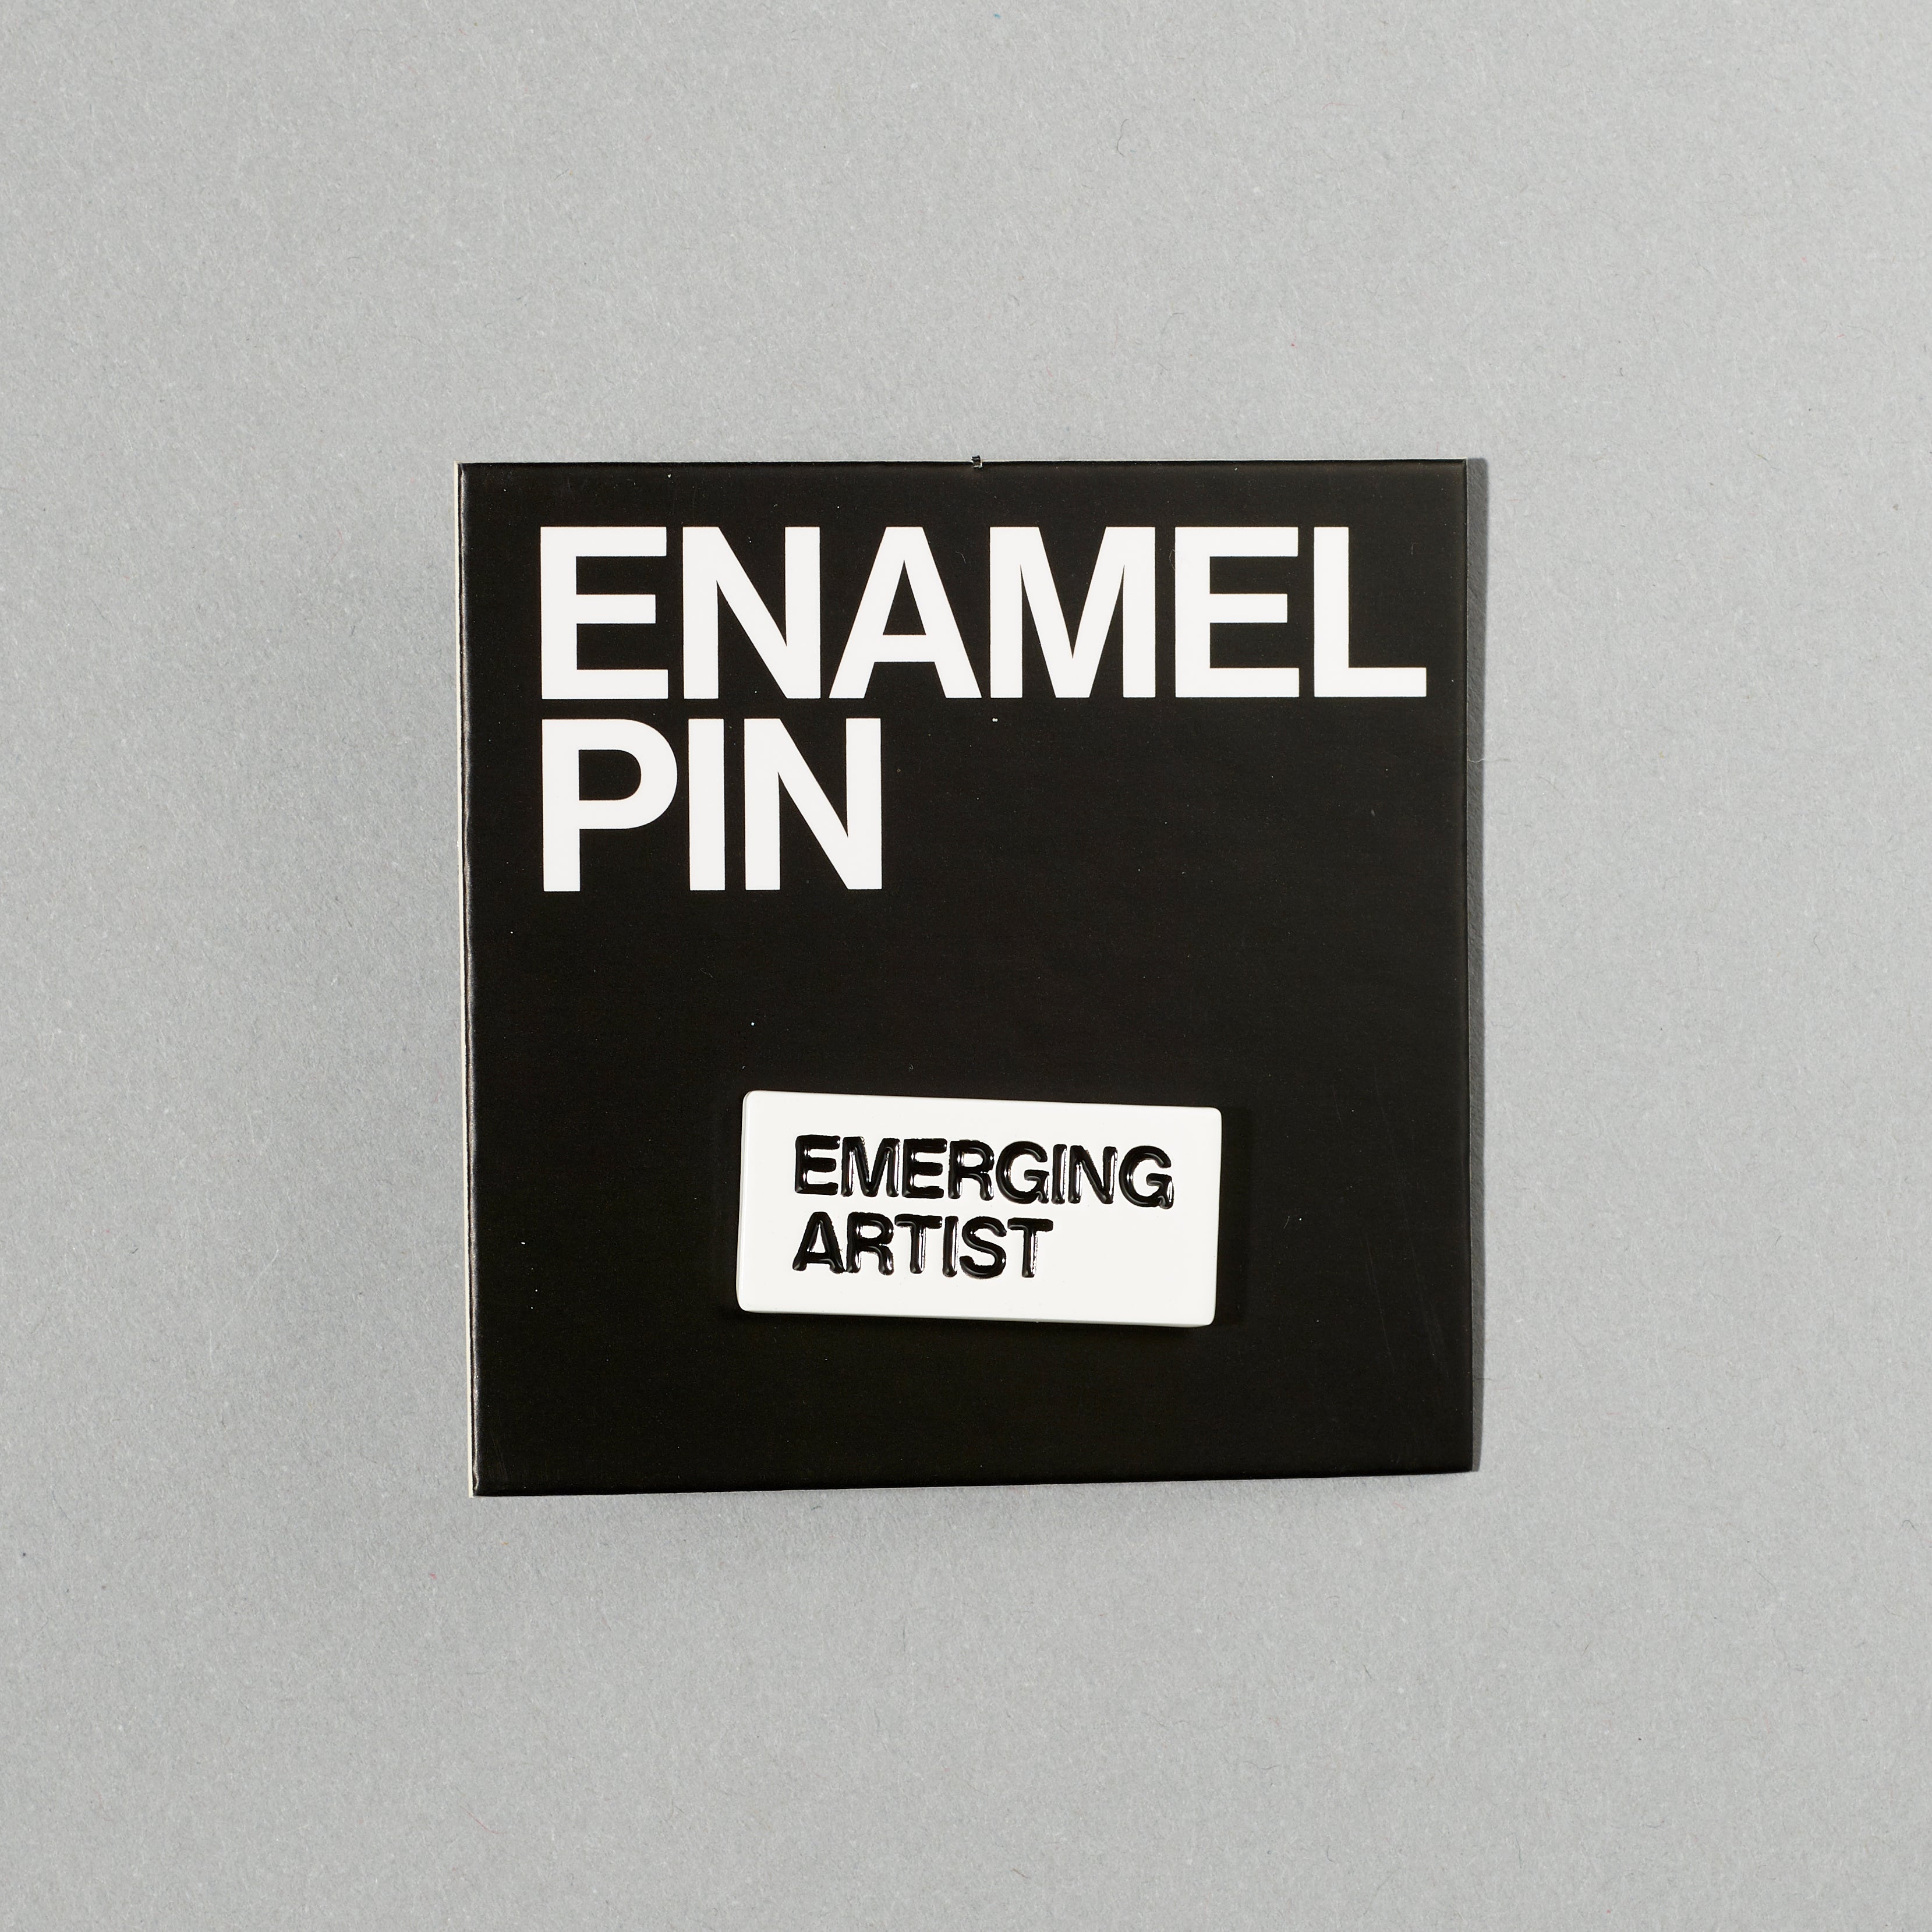 Black nickel plated brass and hard enamel pin that reads Emerging Artist